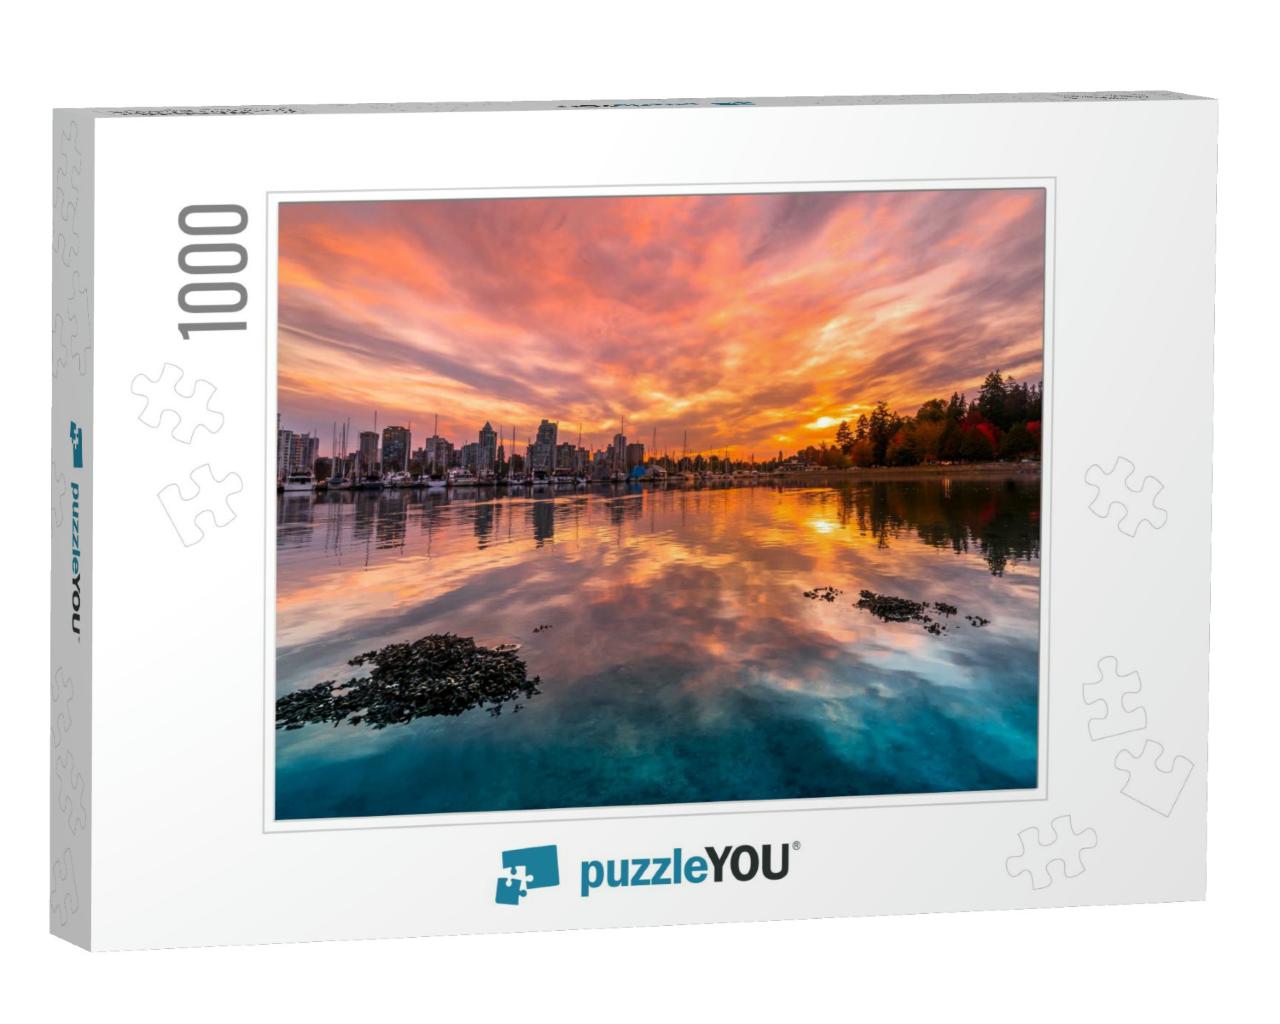 Vancouver Stanley Park Harbourfont Sunset Reflections in... Jigsaw Puzzle with 1000 pieces